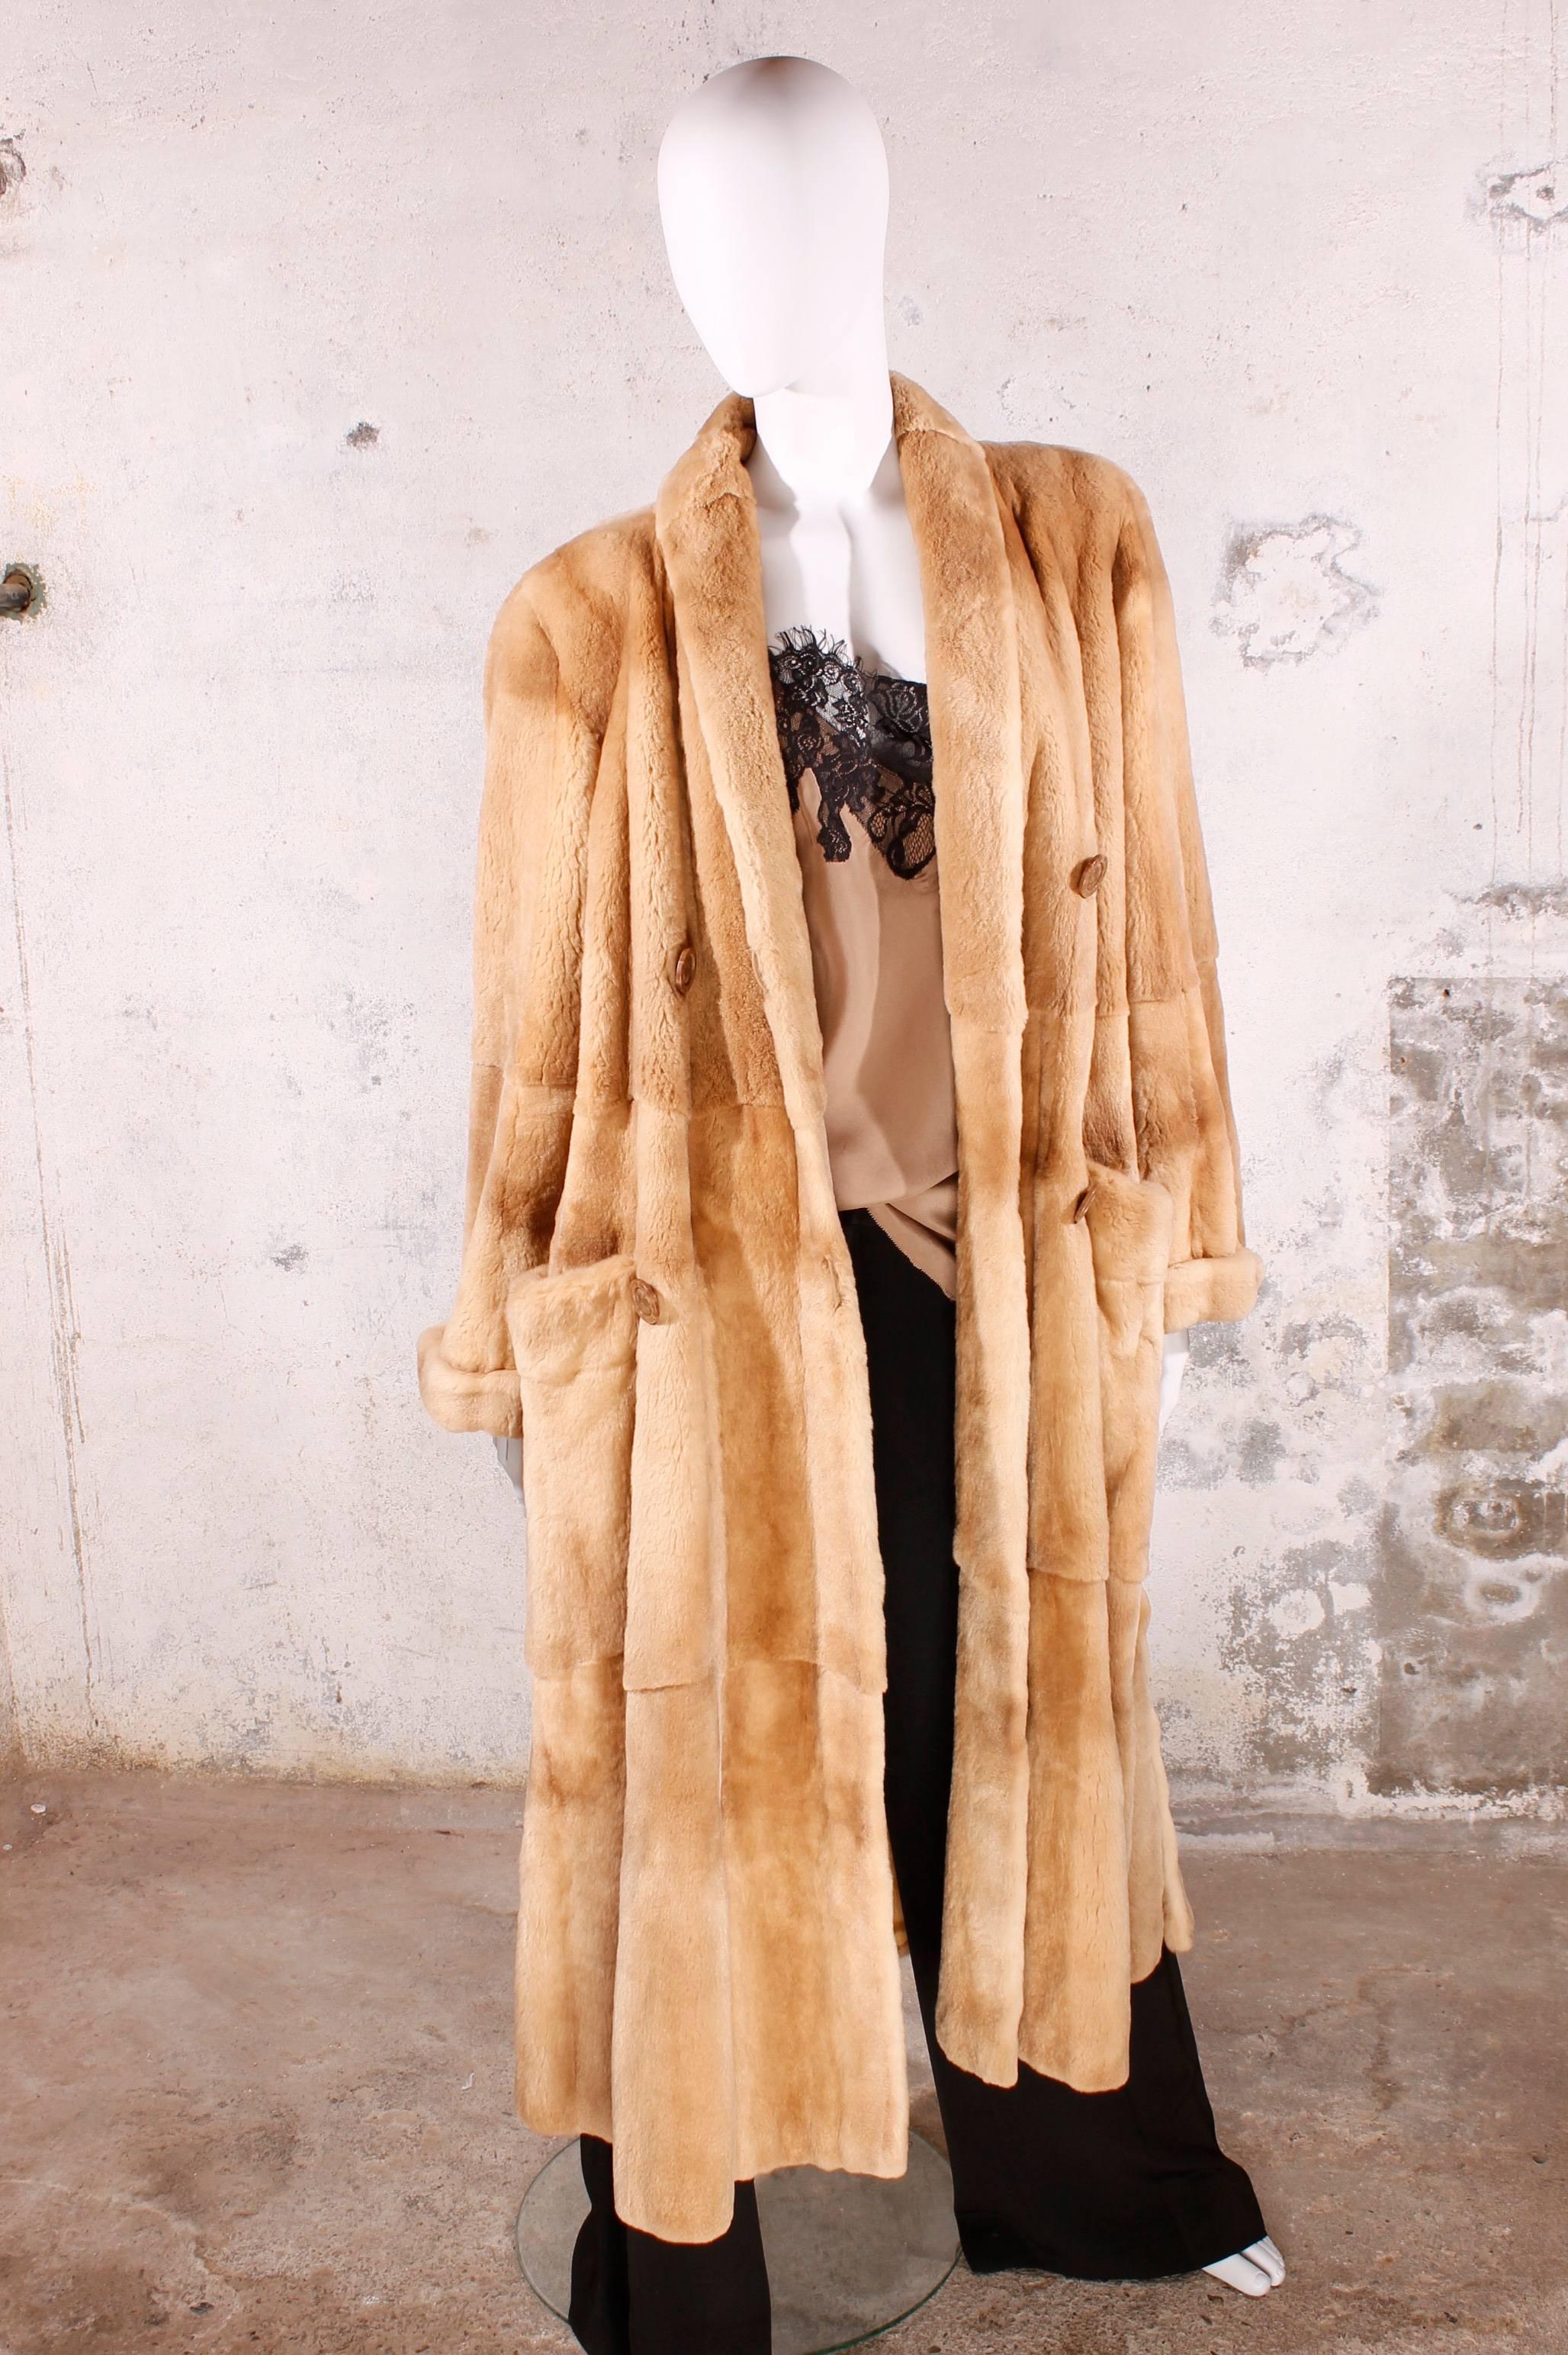 A beautiful long fur coat from the farm of Saga. These minks are ranched and this colour is very special. It's called Palamino mink, which is a lighter shade of beige mink. The skins are all uniform in colour with a slight darker marking along the